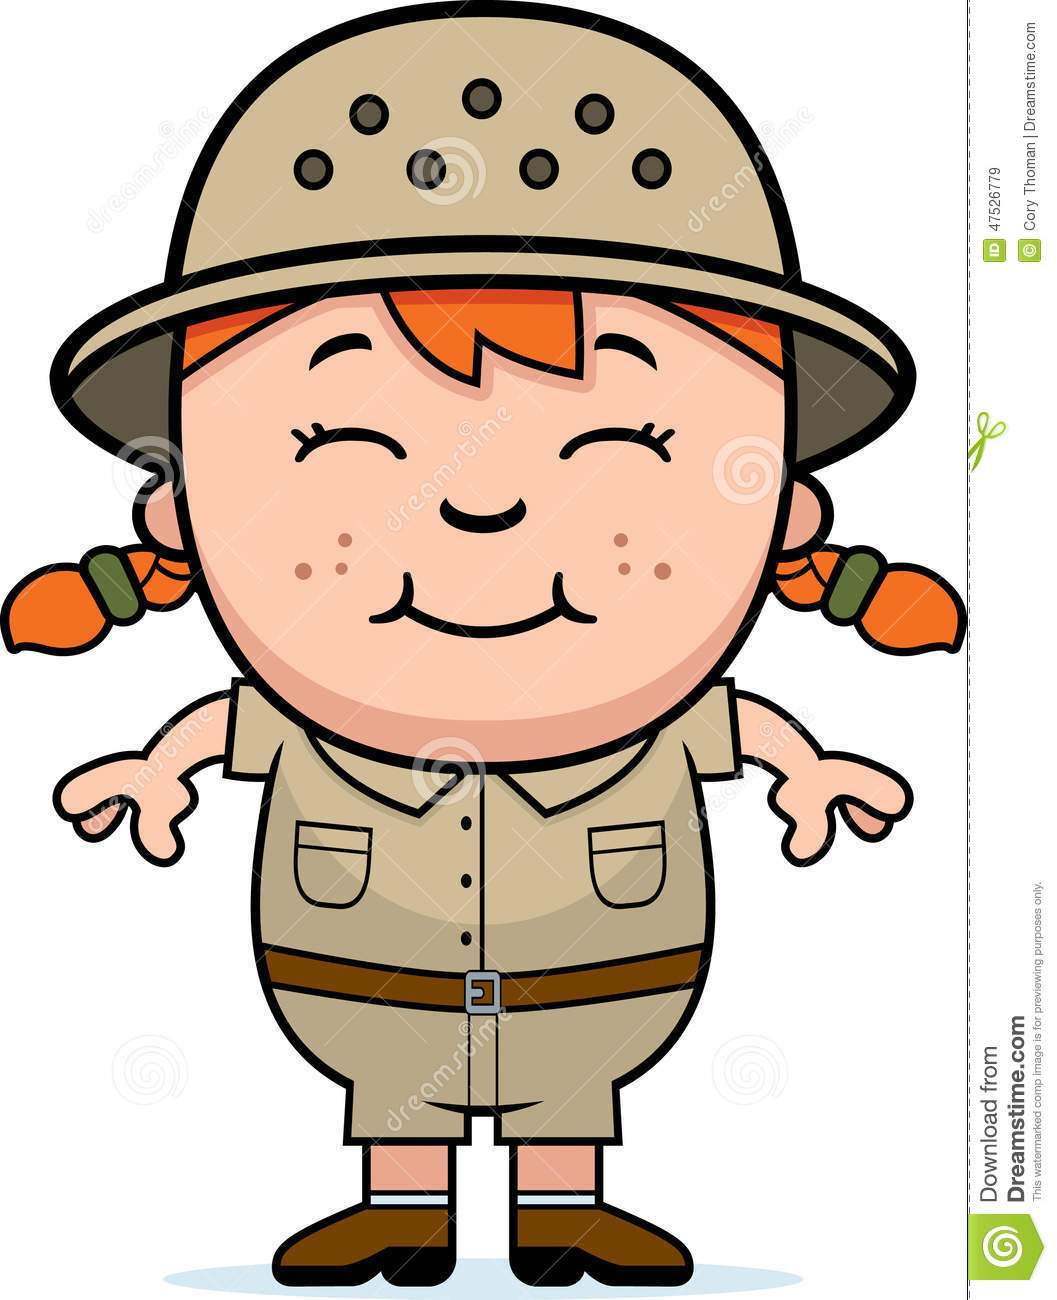 Cartoon Illustration Of A Girl Explorer Standing And Smiling